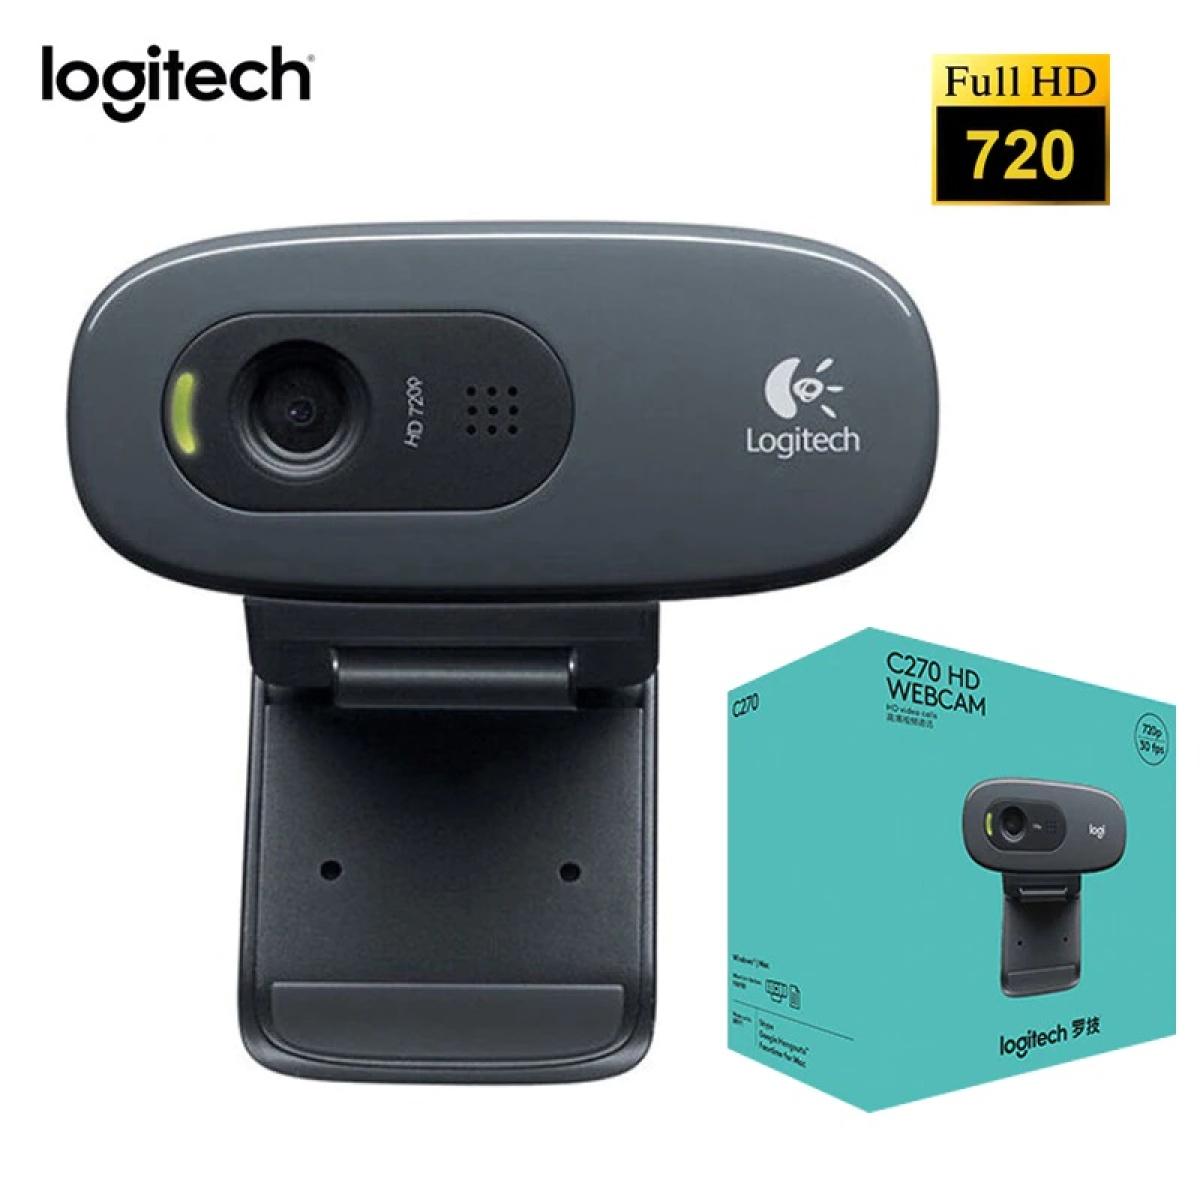 Logitech C270 HD Webcam For Video Conferencing, HD 720p 30 FPS, Widescreen HD Video Calling, HD Light Correction, Noise-Reducing Mic